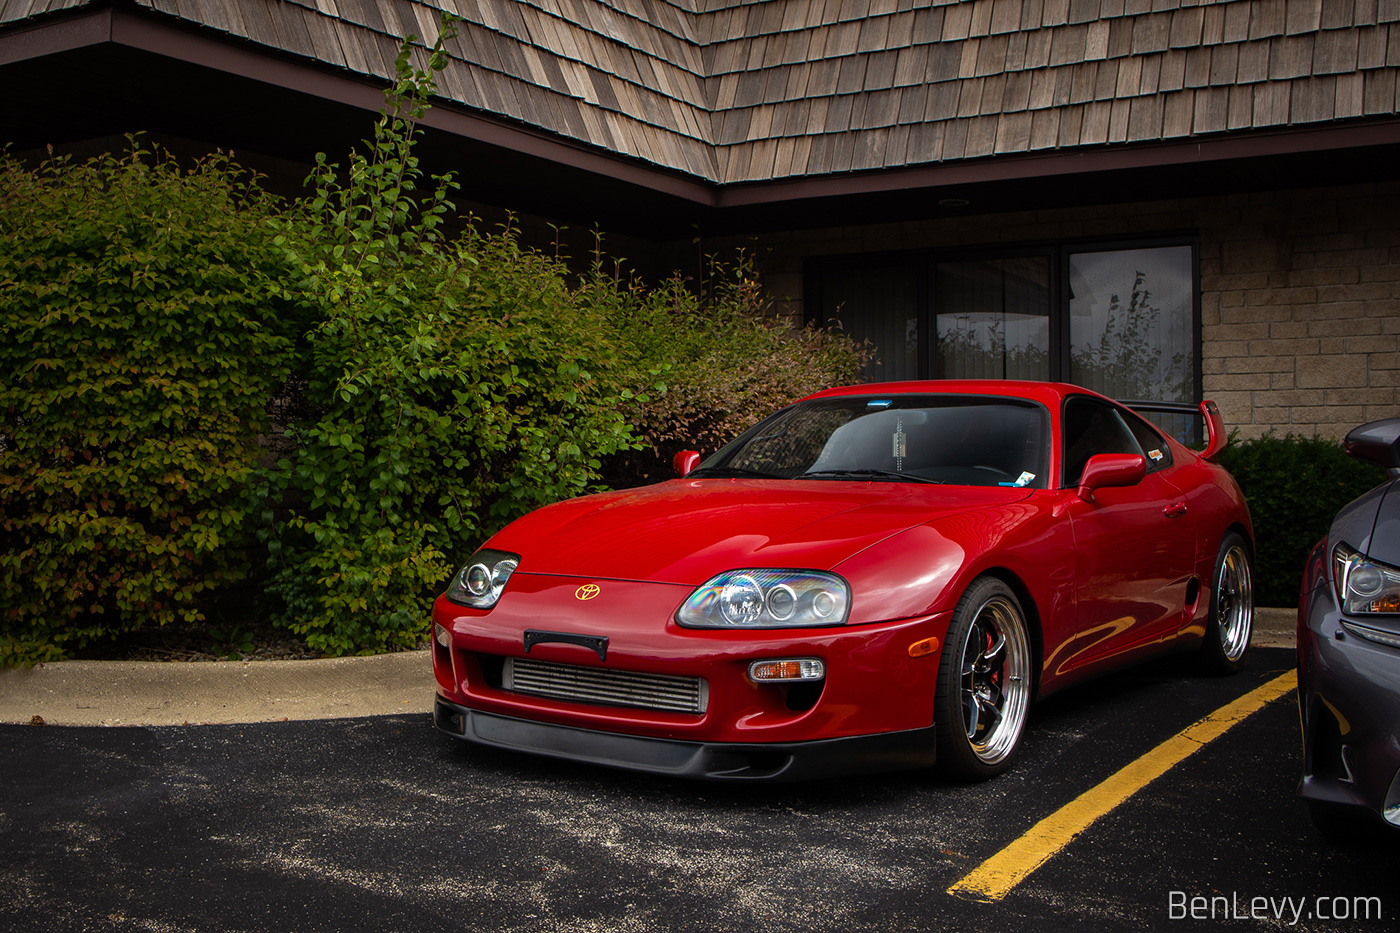 Red Mk4 Toyota Supra outside of Executive Motor Carz